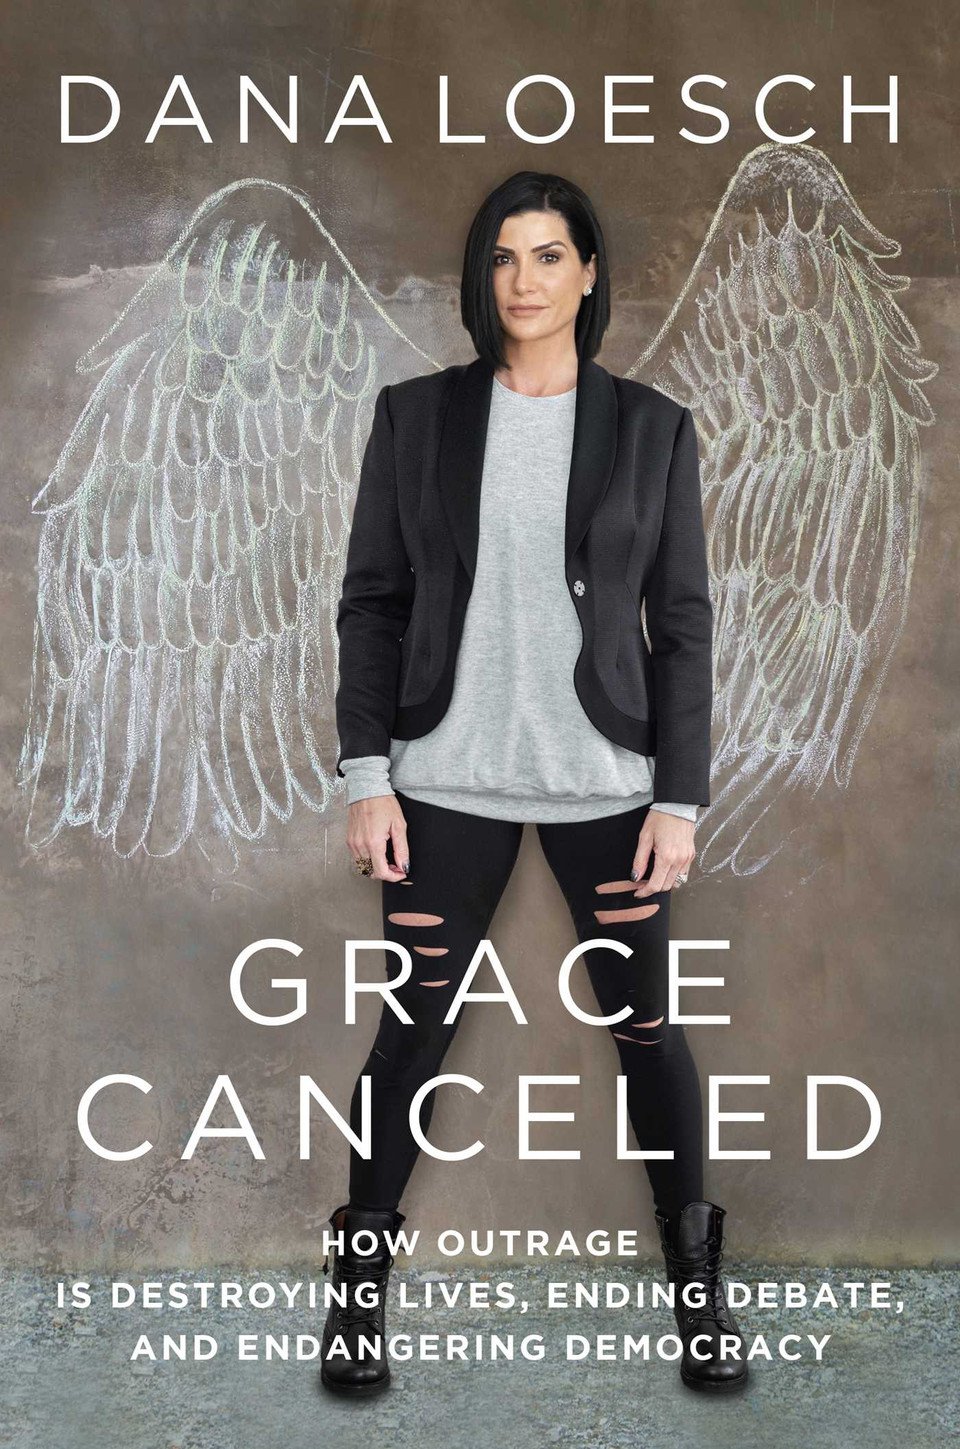 Grace Canceled: How Outrage is Destroying Lives, Ending Debate, and Endangering Democracy